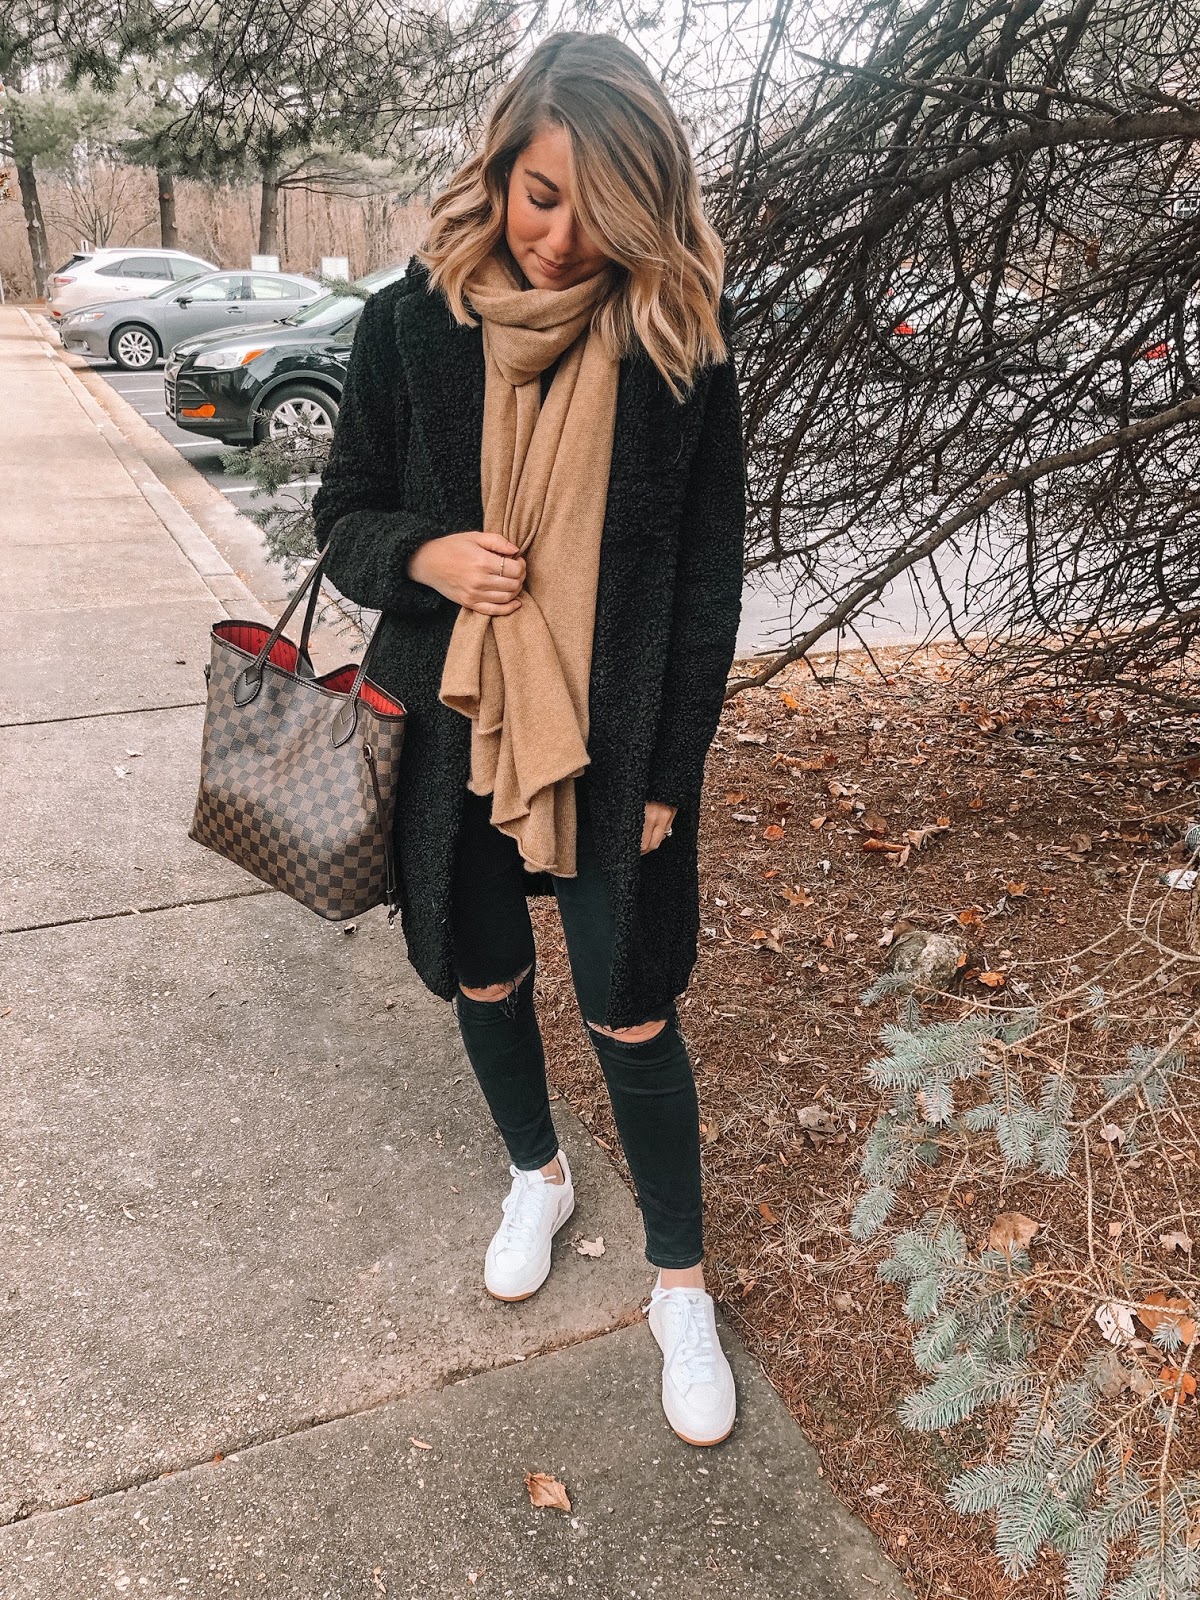 Rosy Outlook: Styling Sneakers for Winter + FF Link-Up!